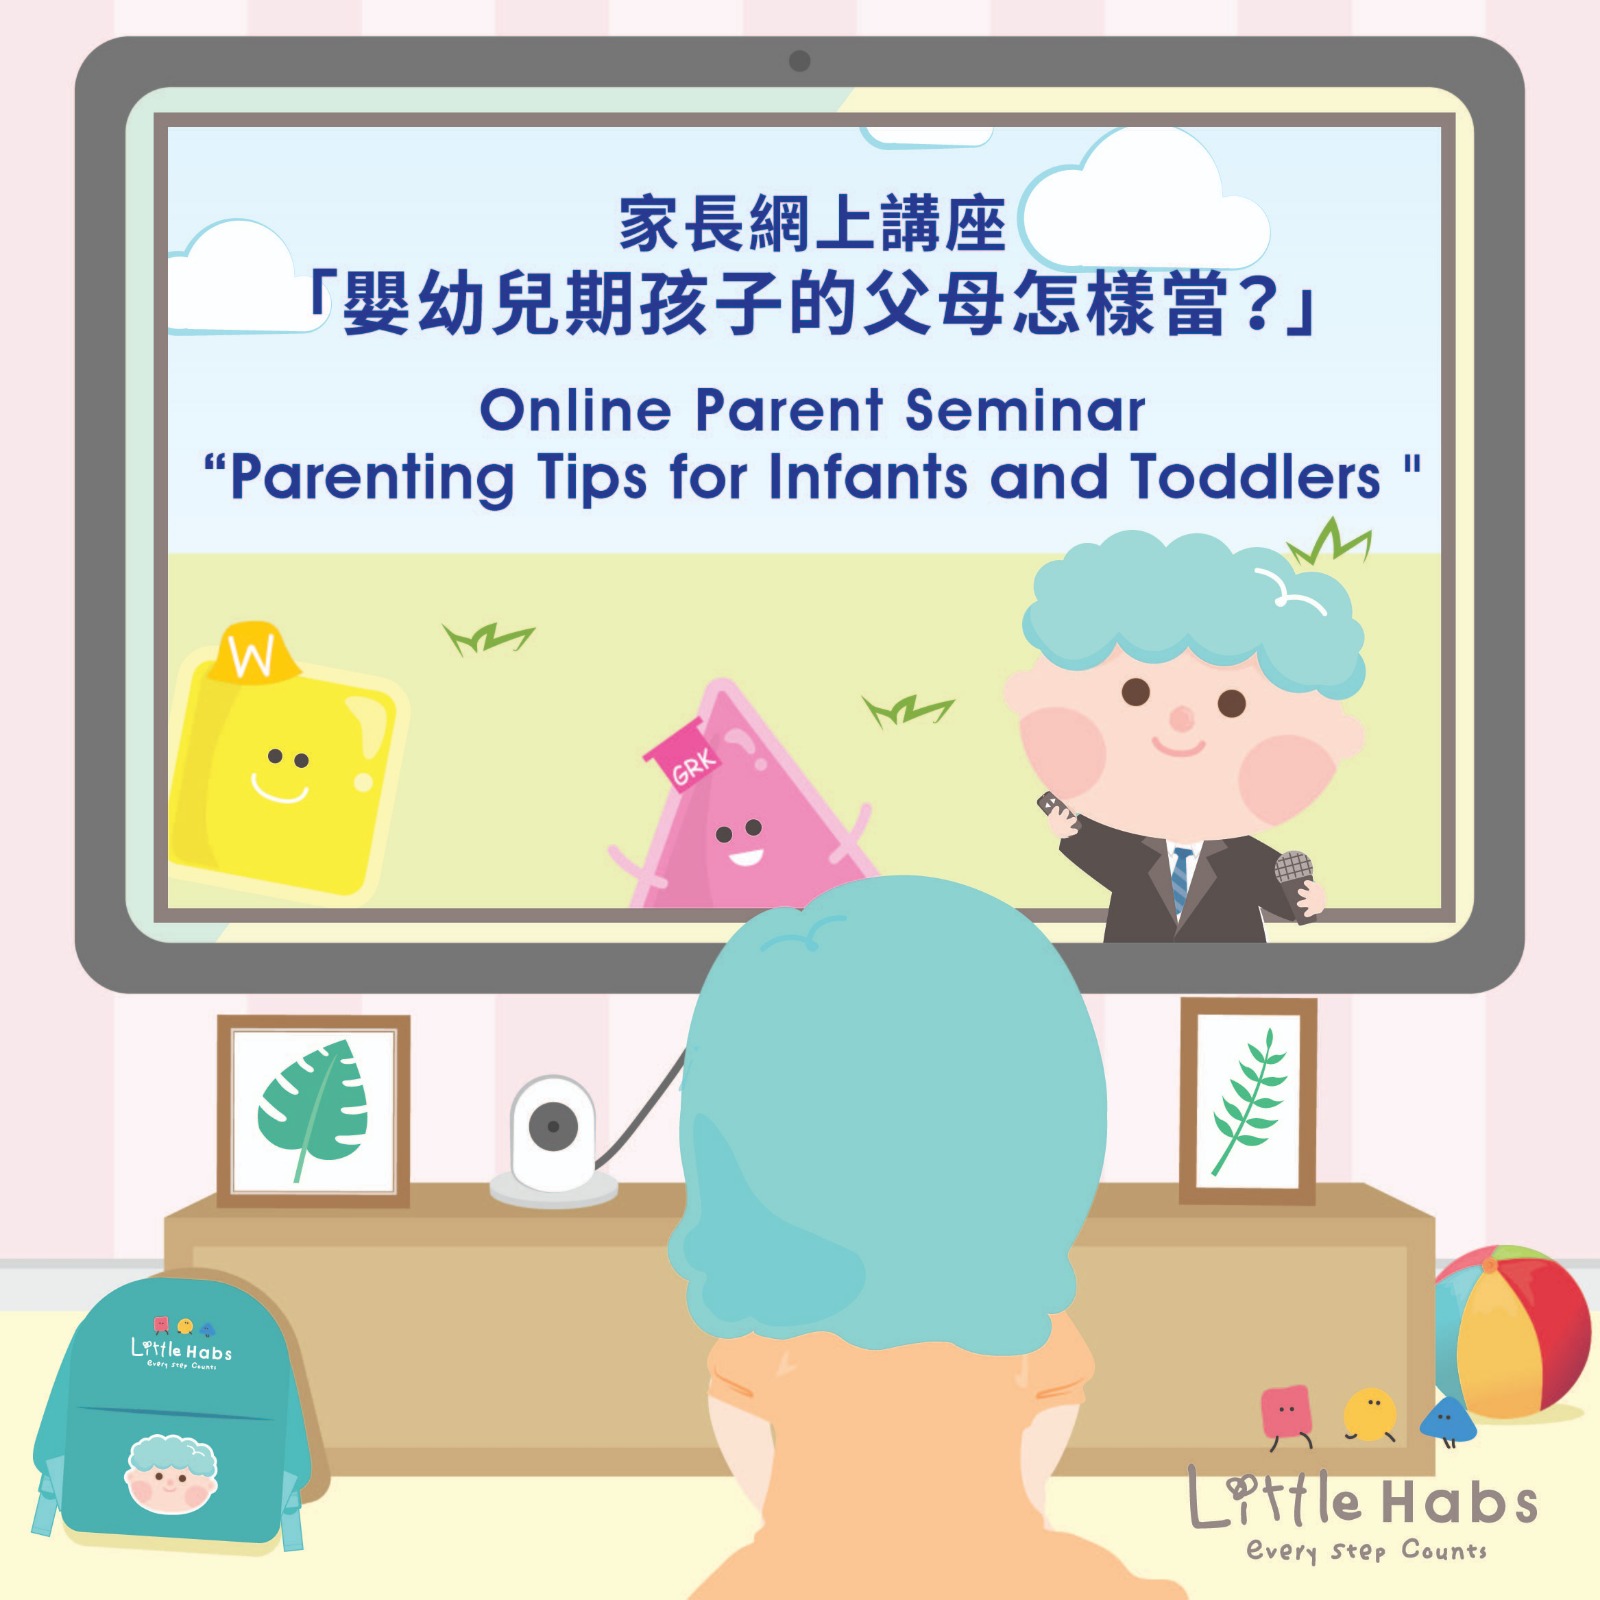 Online Parent Seminar -Parenting Tips for Infants and Toddlers